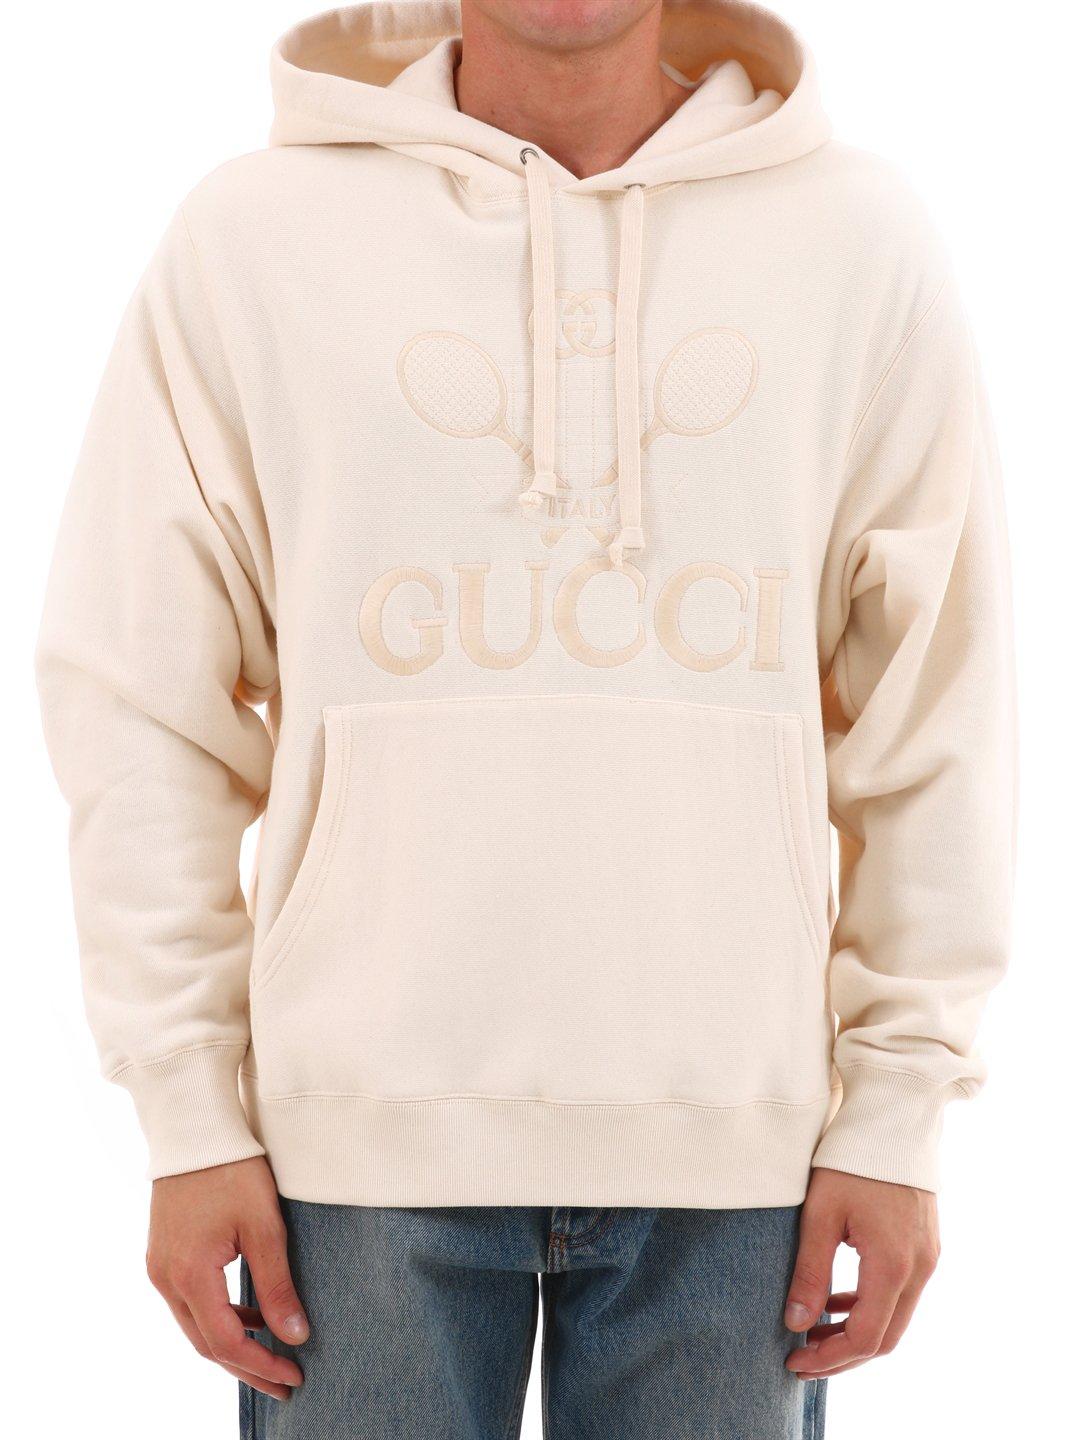 gucci tan hoodie buy clothes shoes online